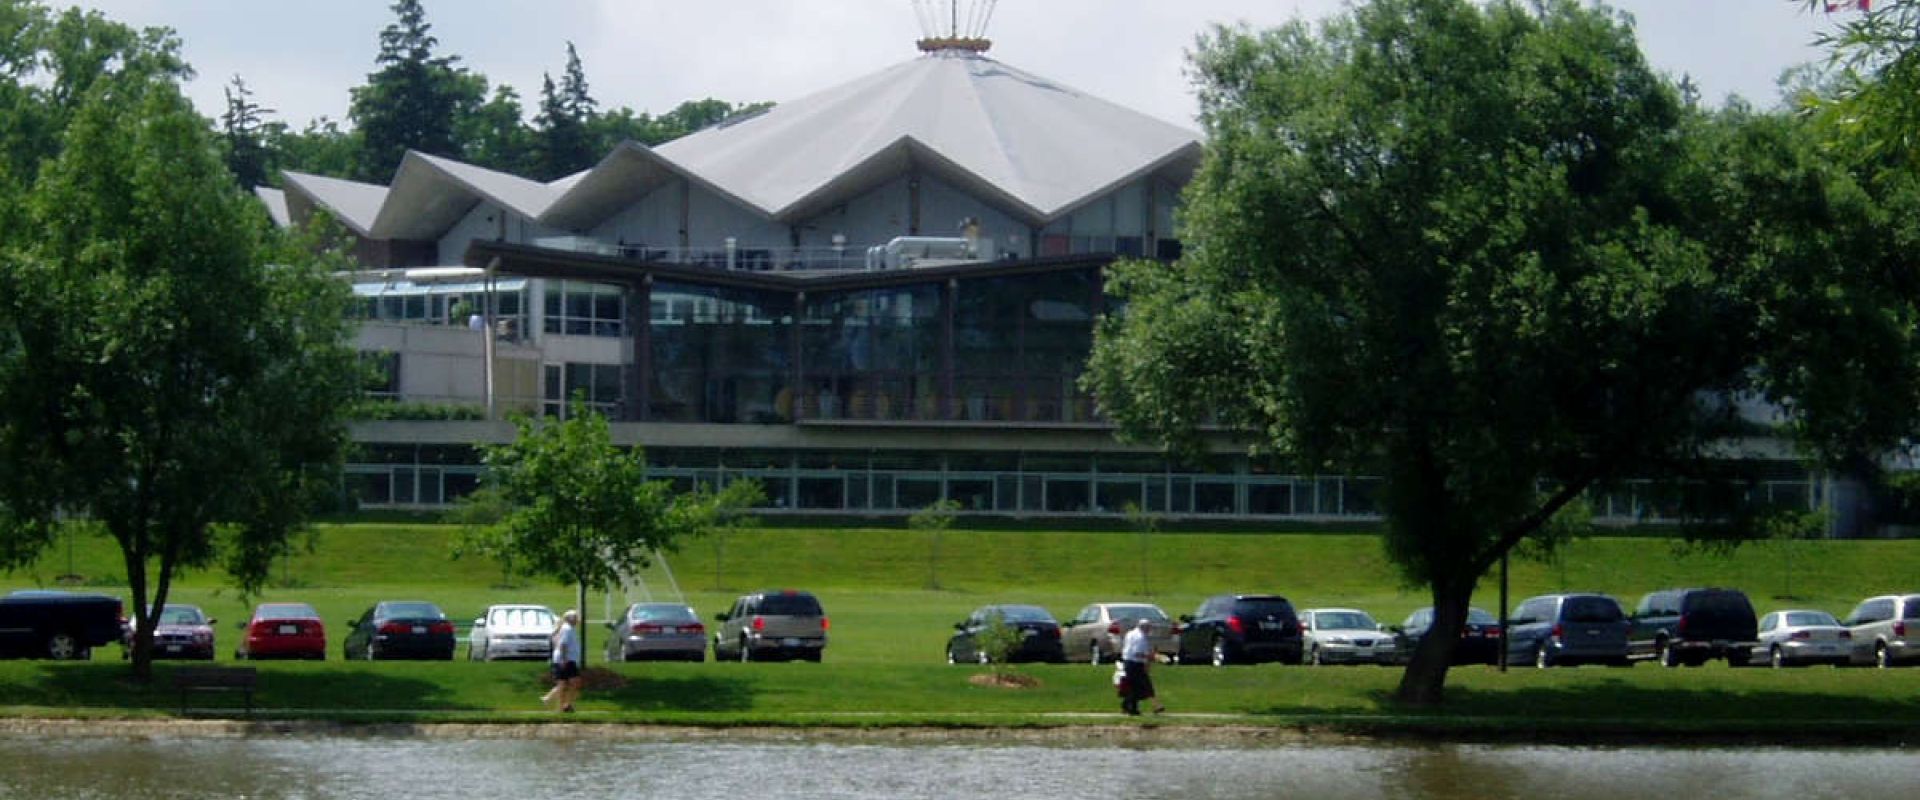 The Stratford Festival Theatre is located along the Thames River. It is a large, round theatre building with a fluted roof and flag on top. 